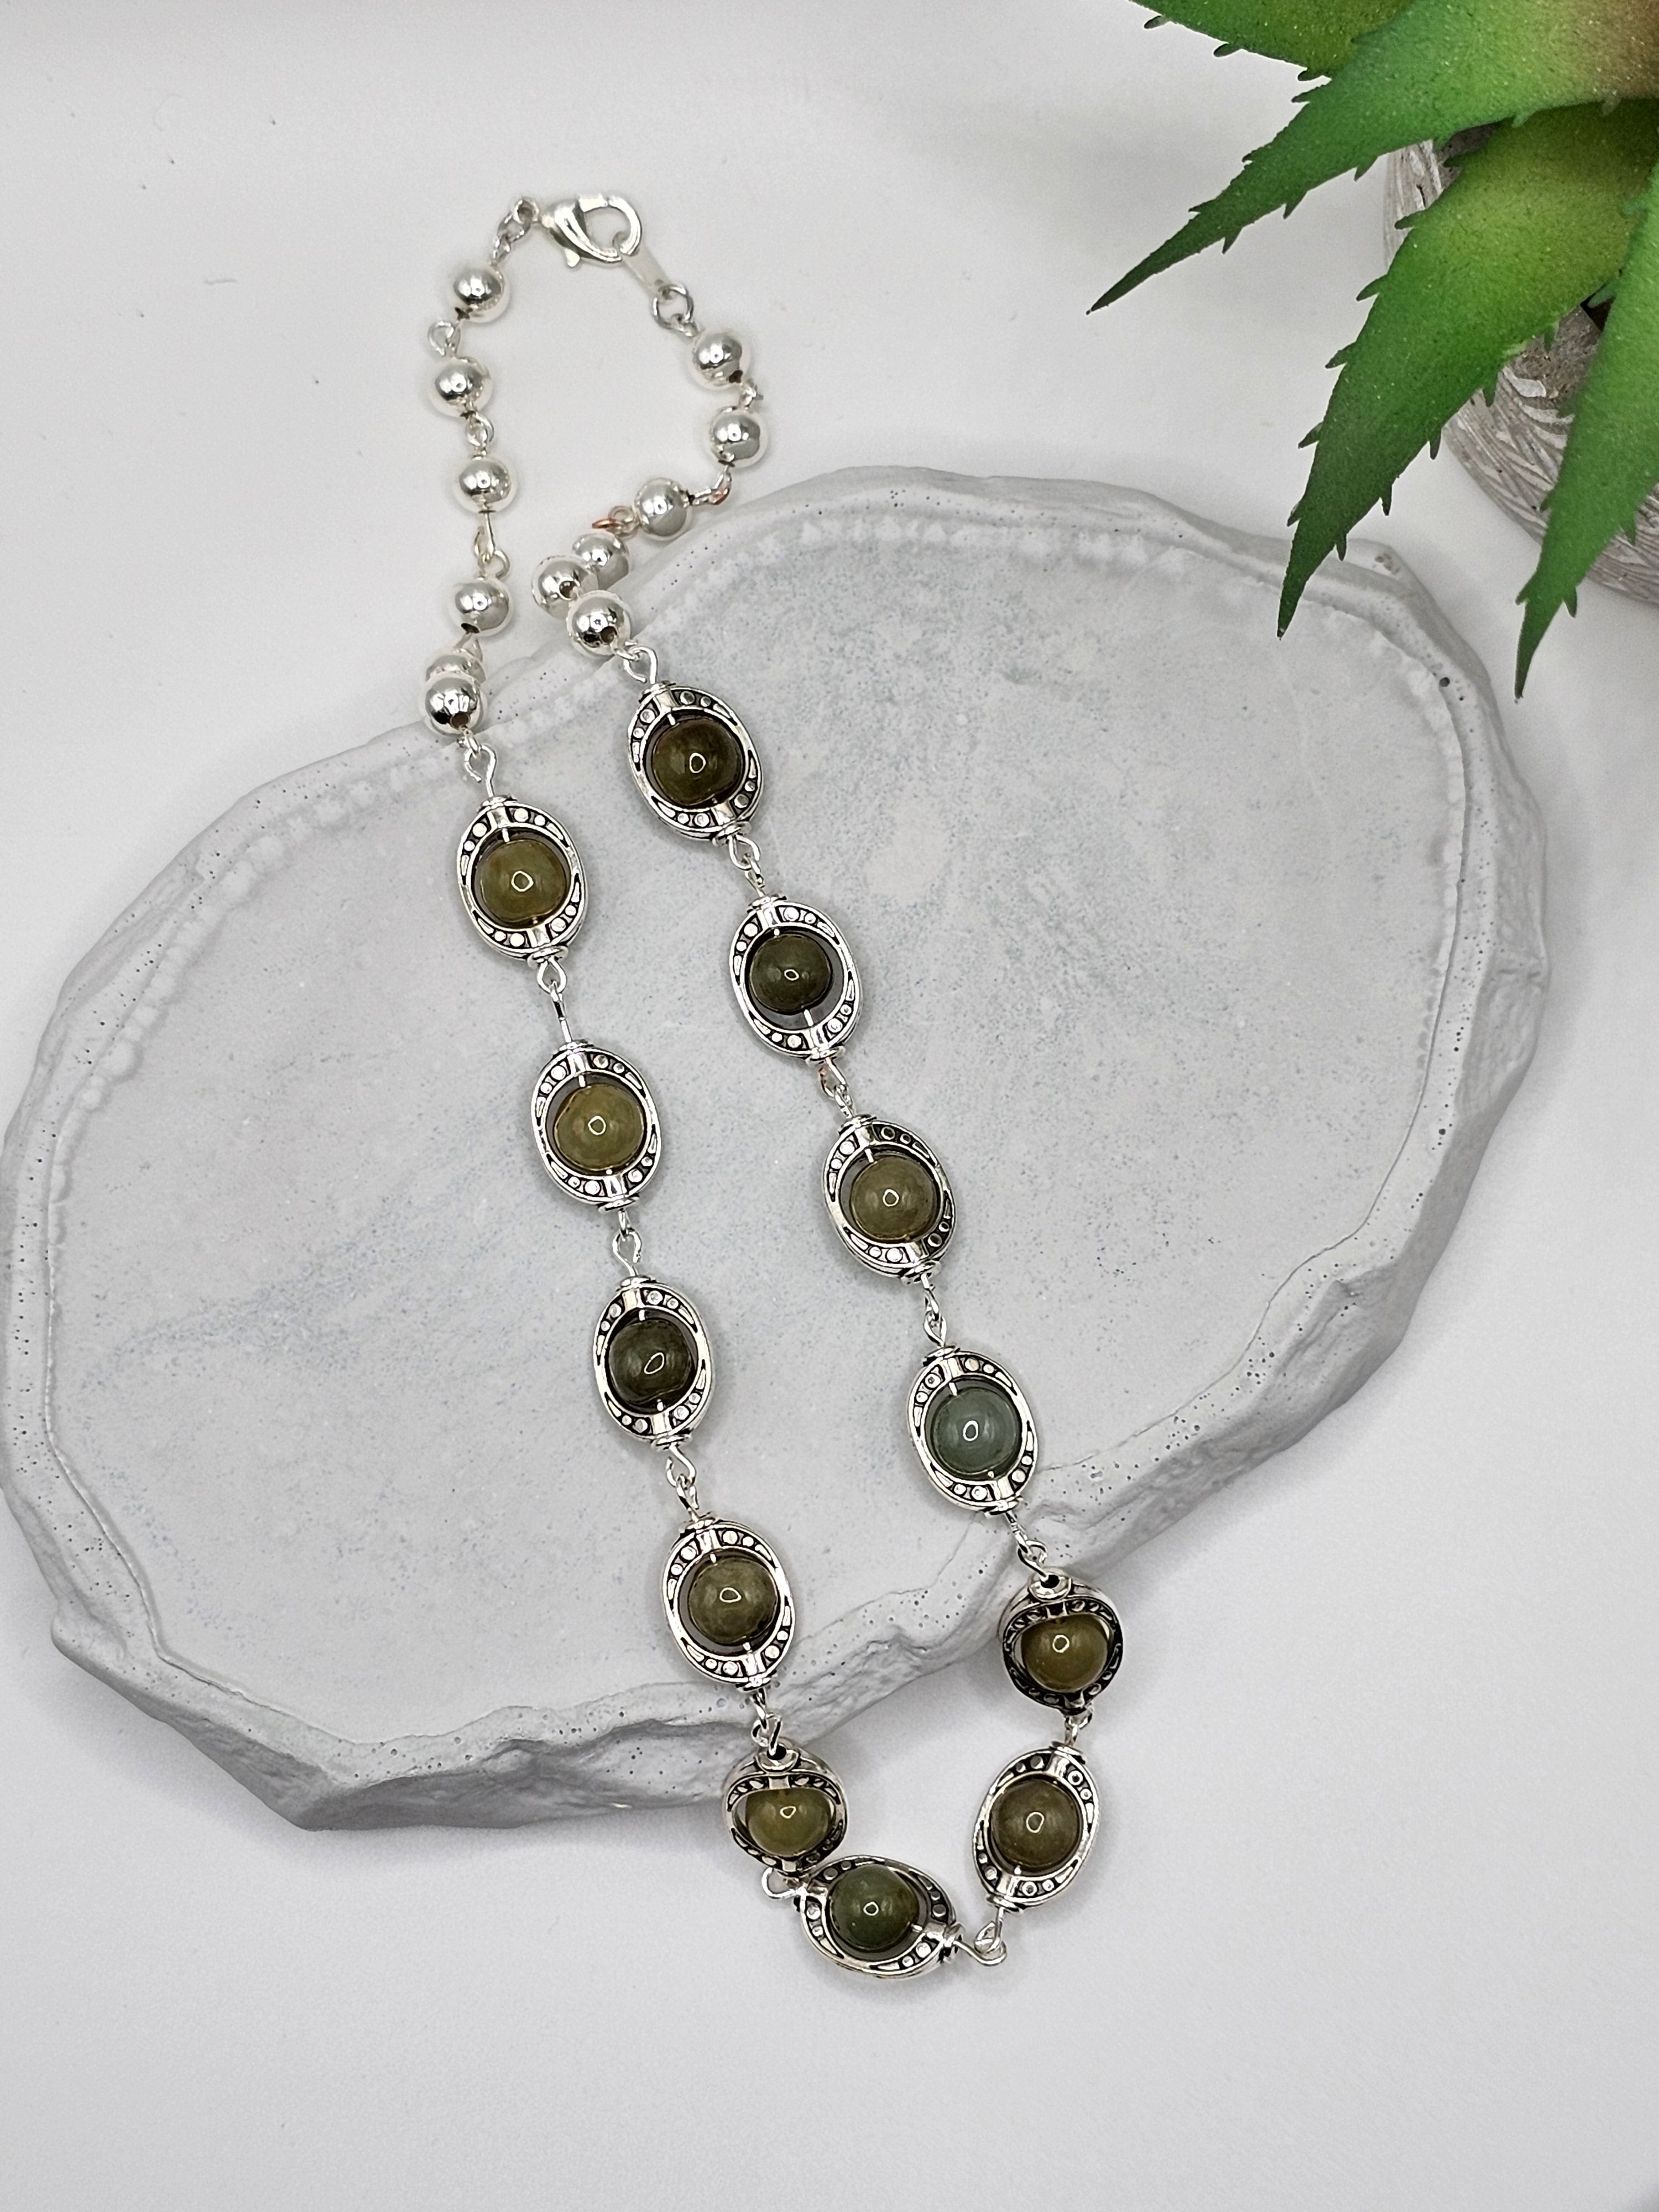 Green agate and silver overlay necklace